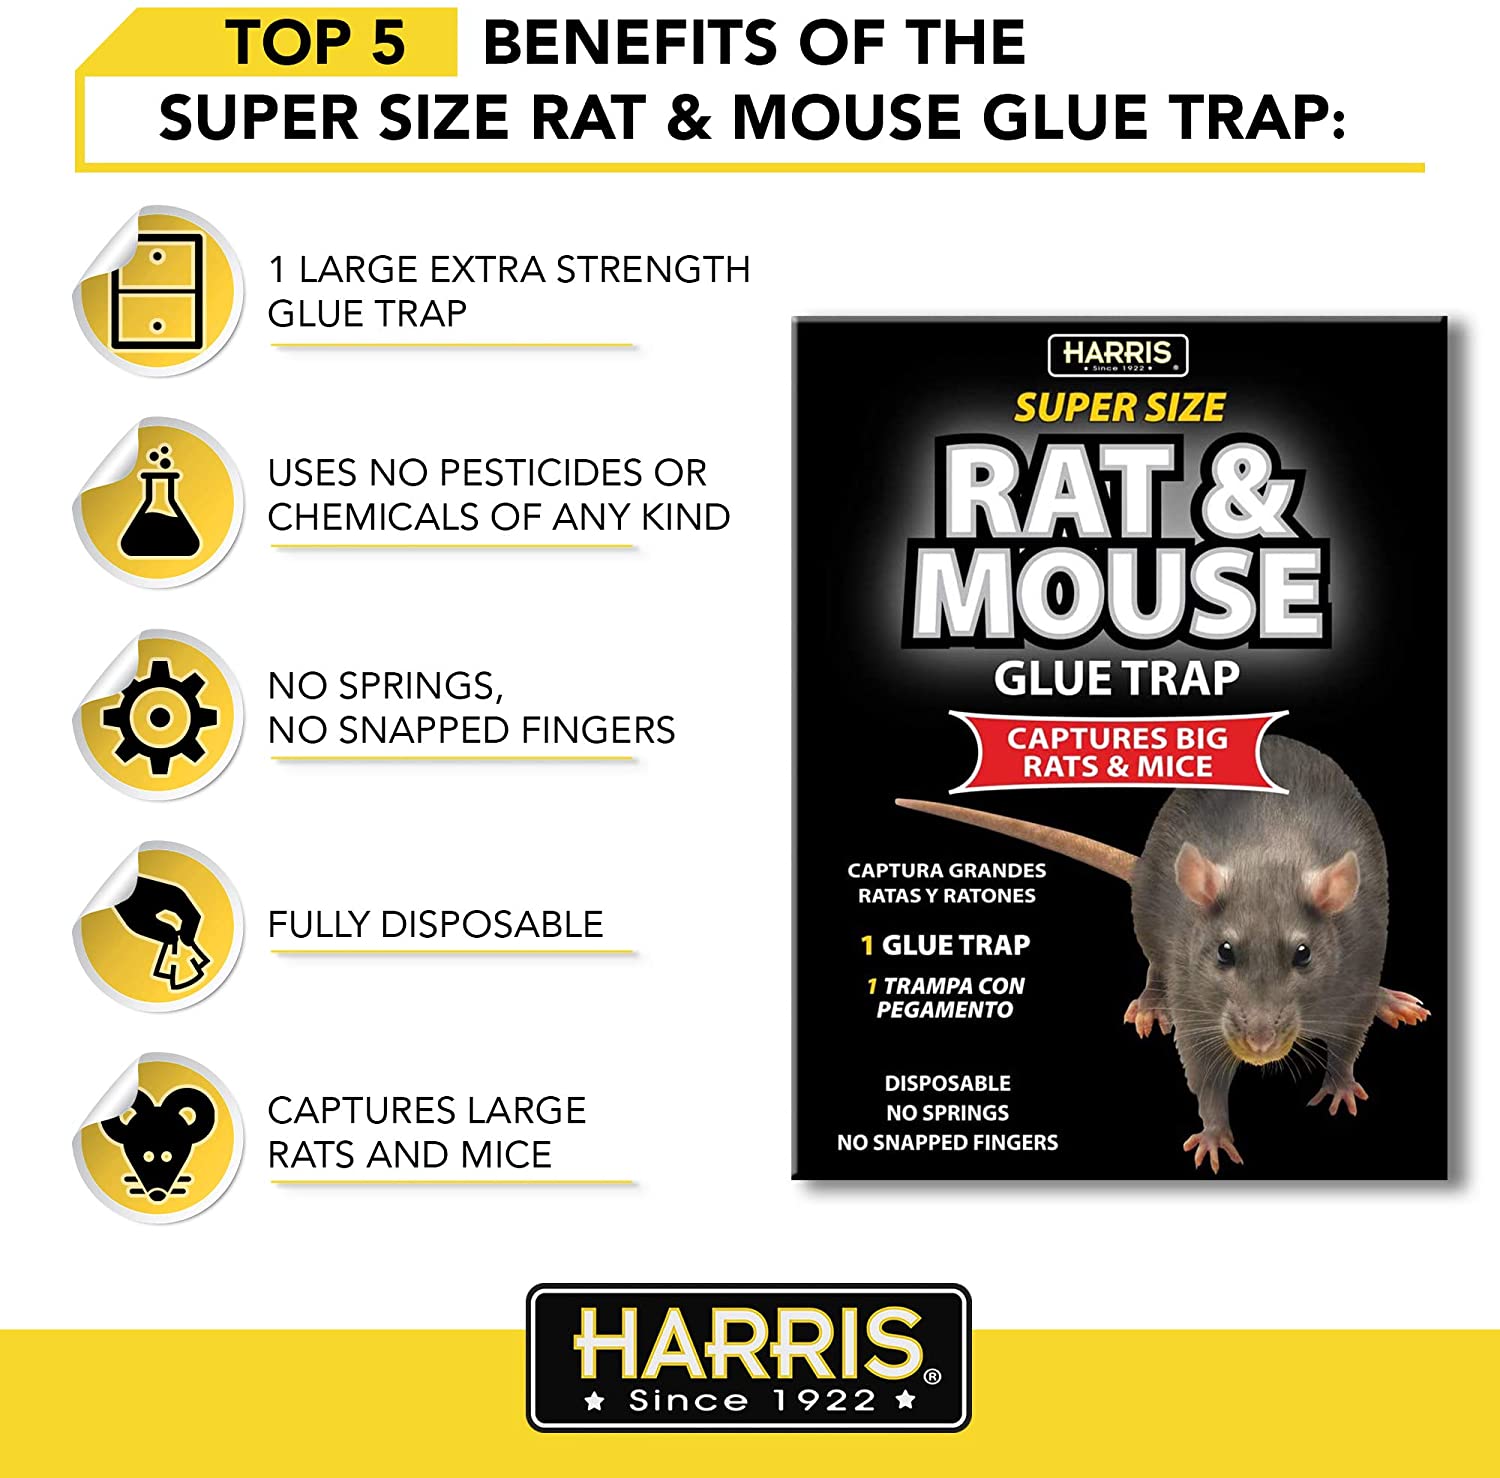 New Pack Of 2 Rodent Mouse Rat Sticky Glue Traps Extra Strong Pads